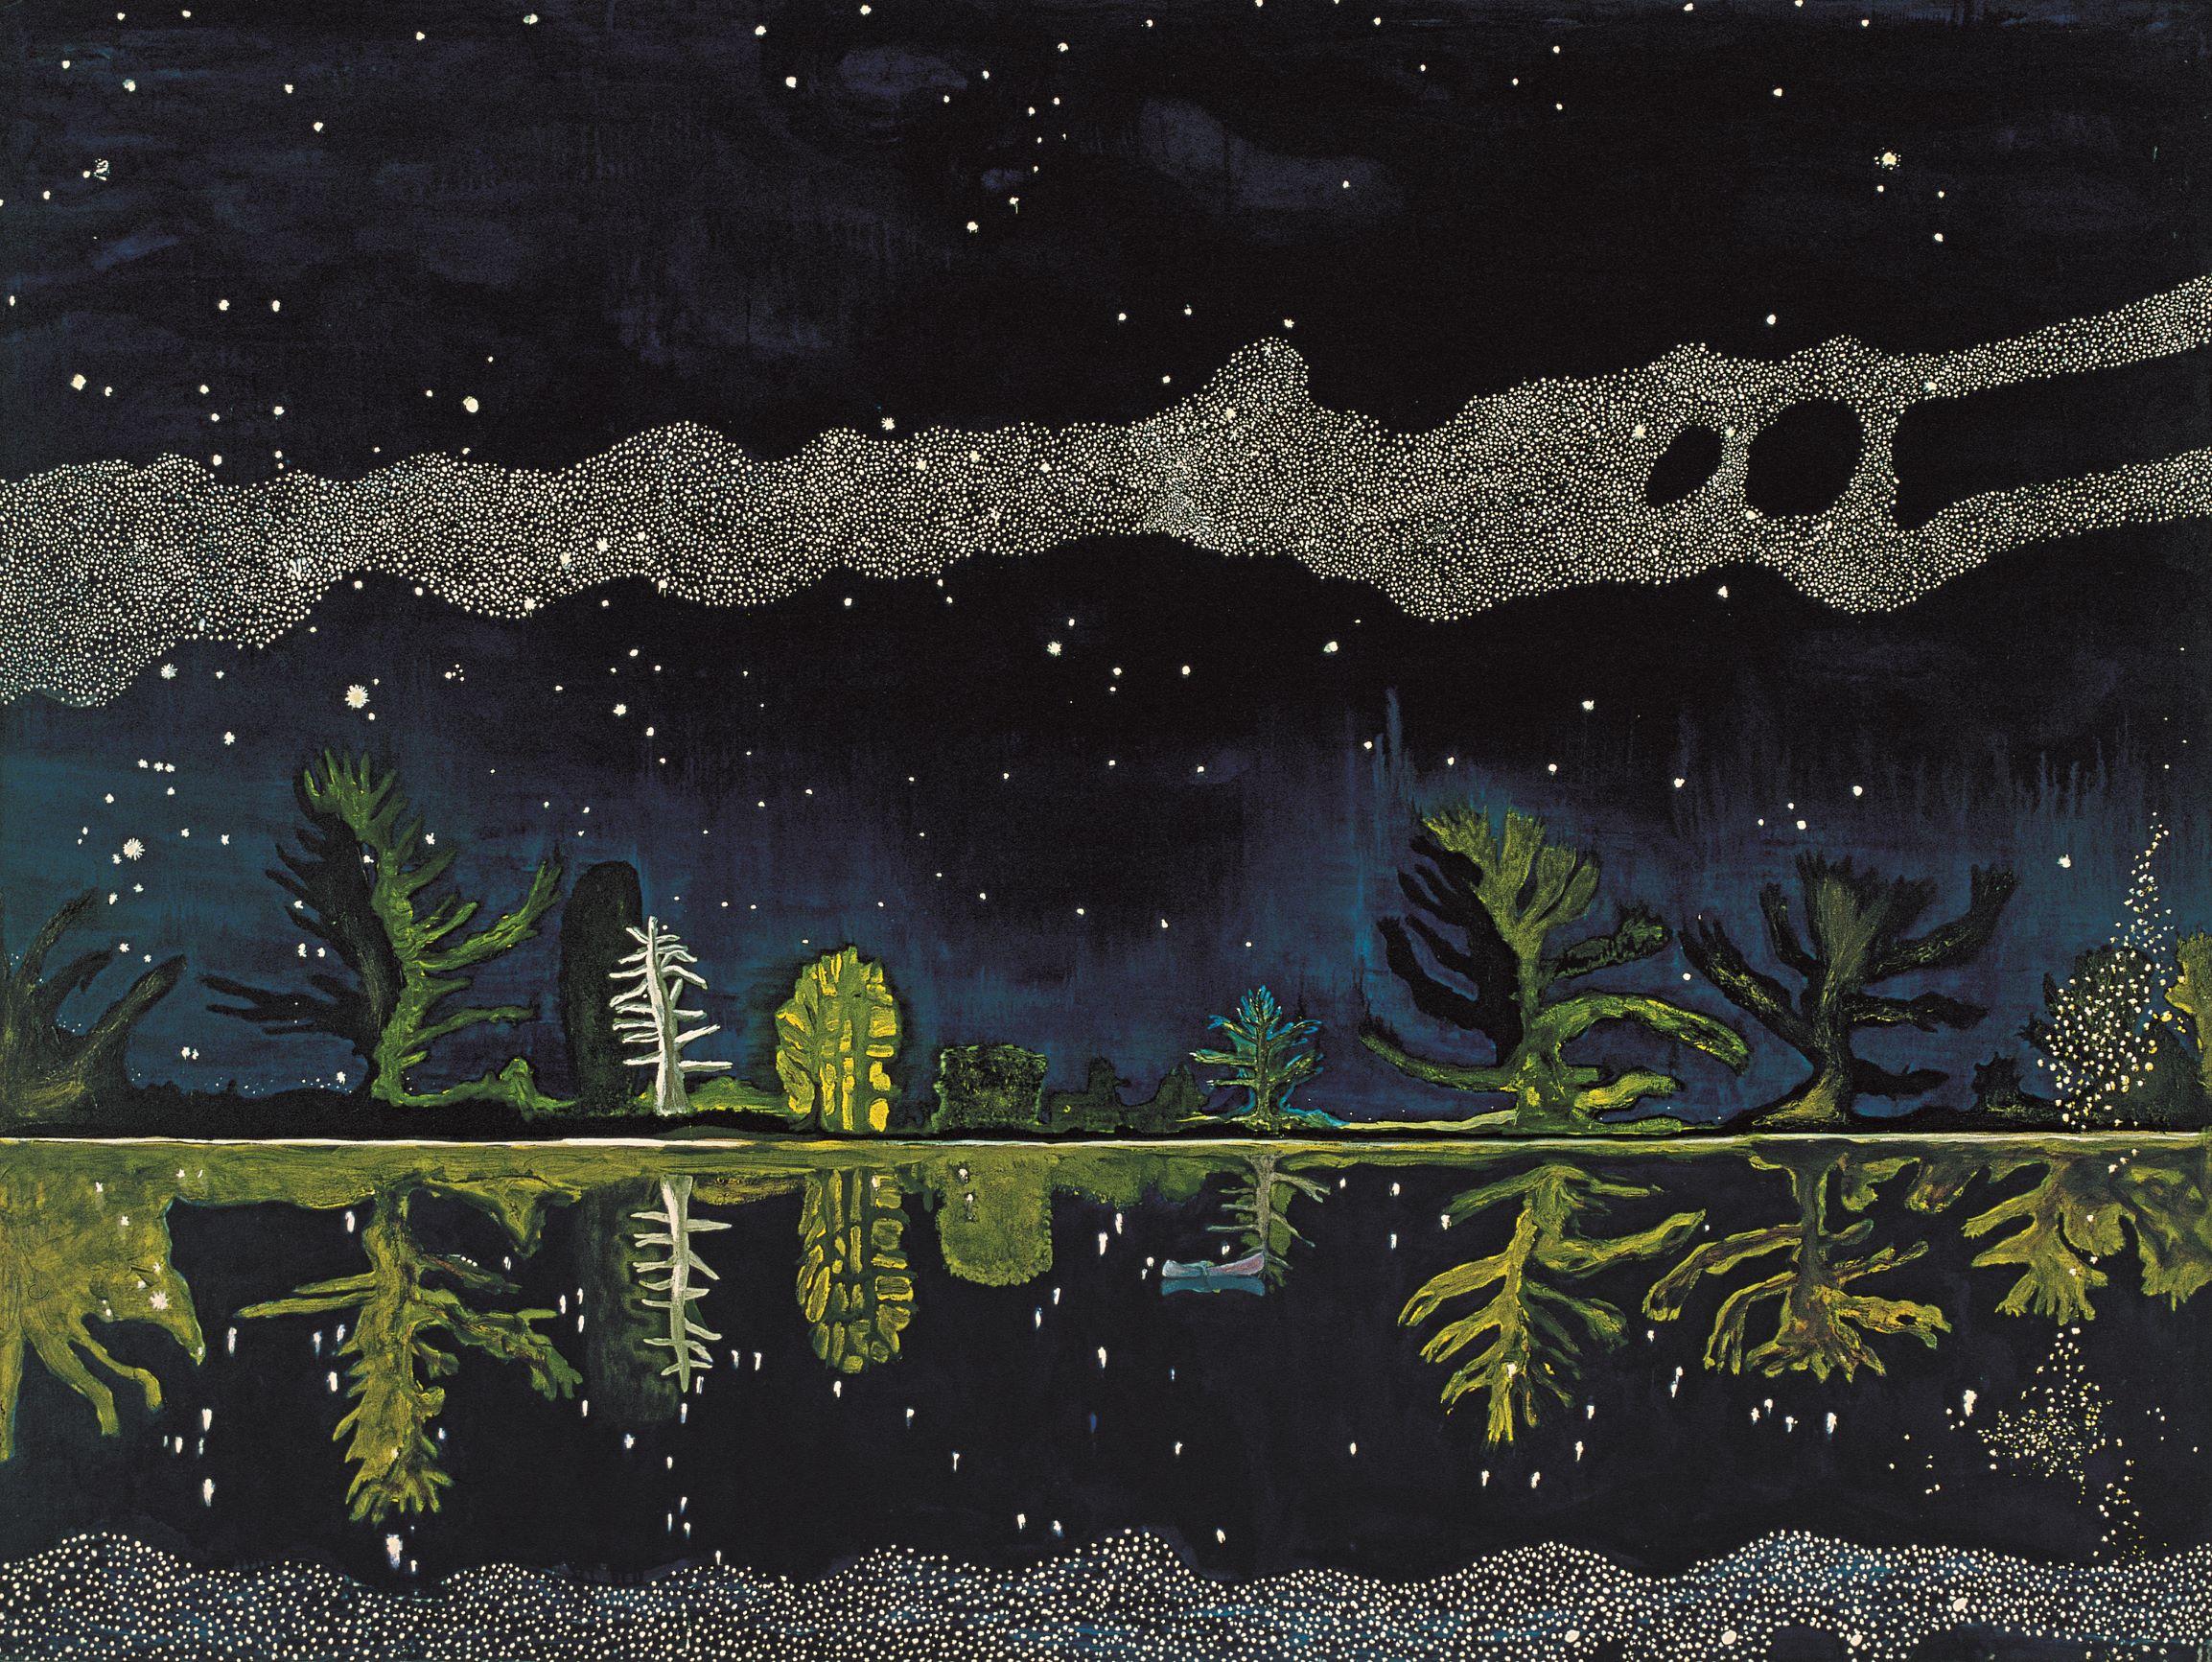 Milky Way (1989-90) by Peter Doig 